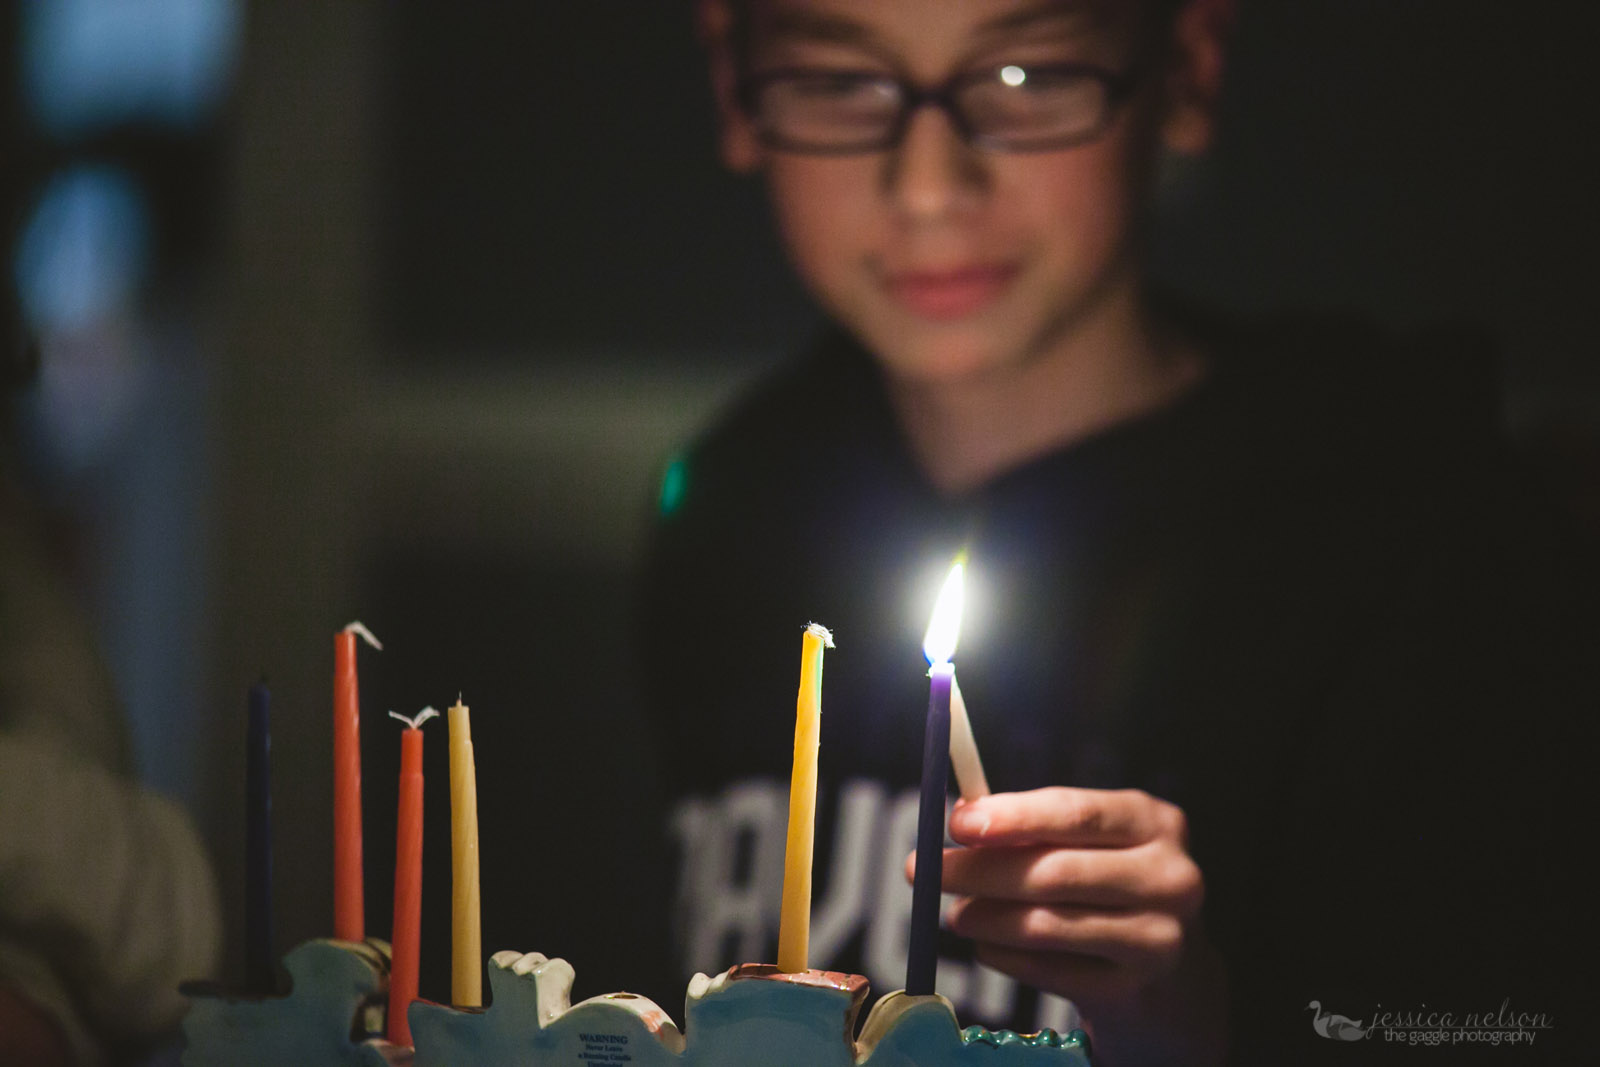 8 ways to photograph your hanukkah celebration by Jessica Nelson